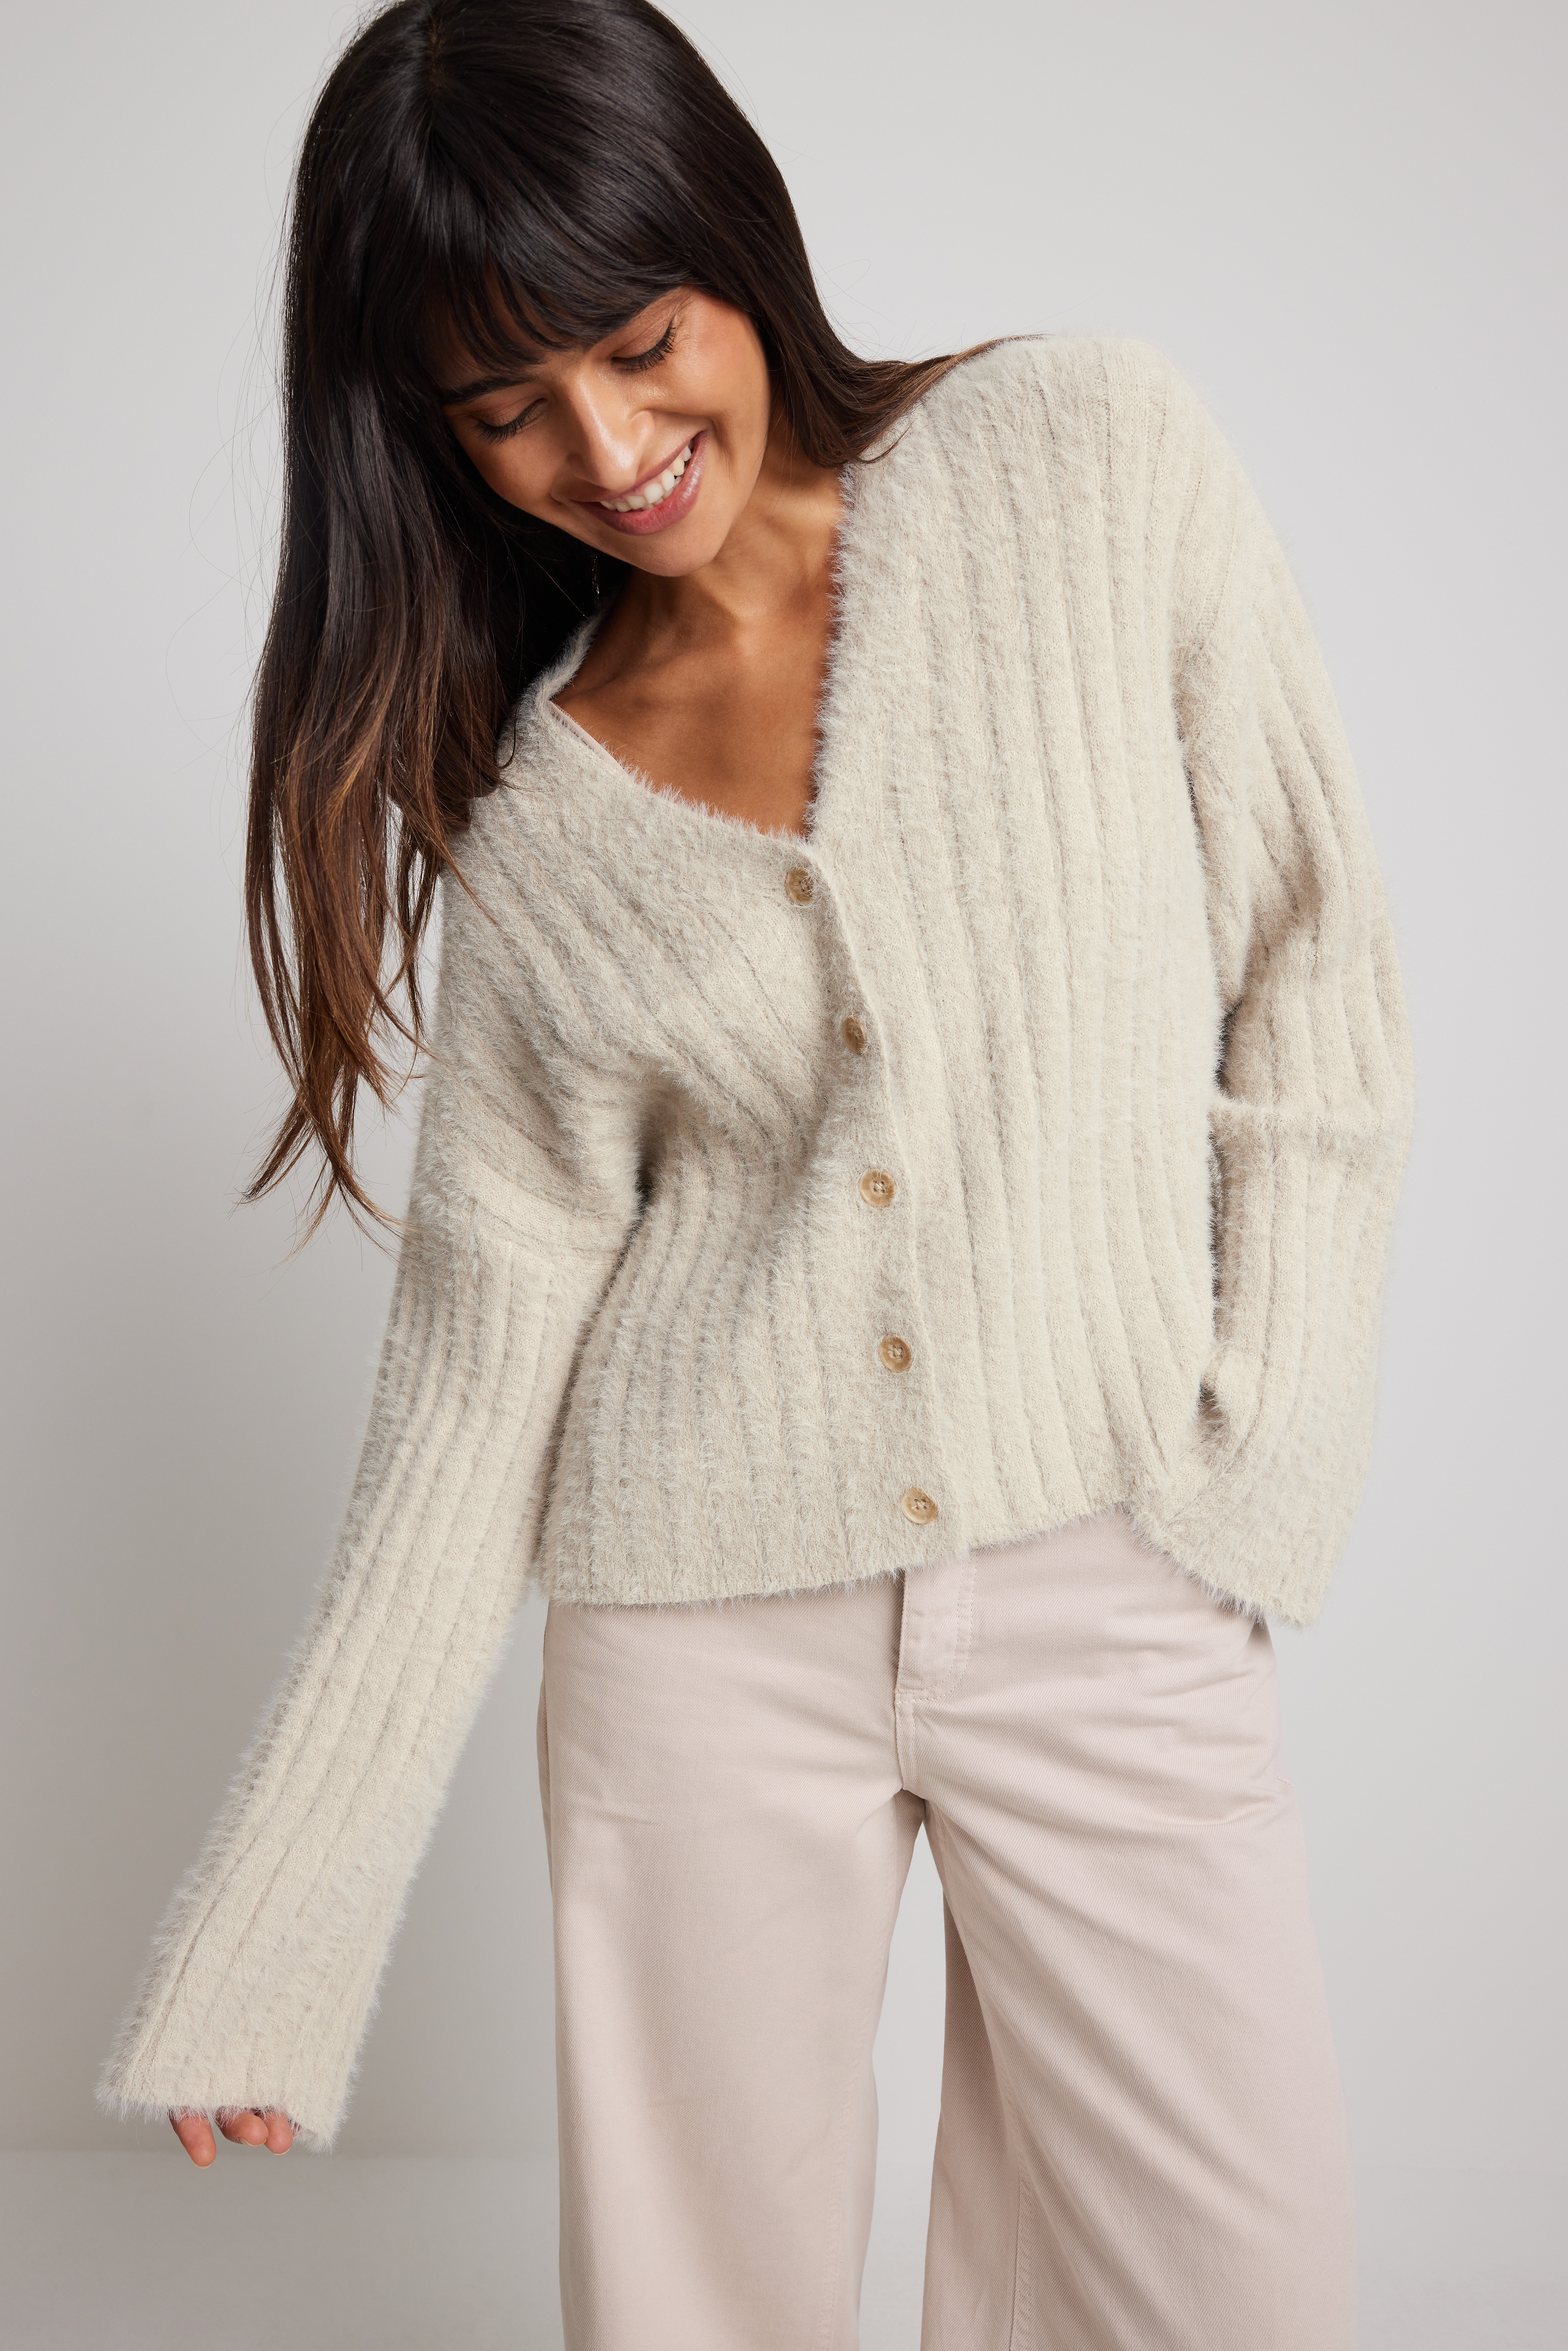 Ivory Cable Knit Cardigan, WHISTLES